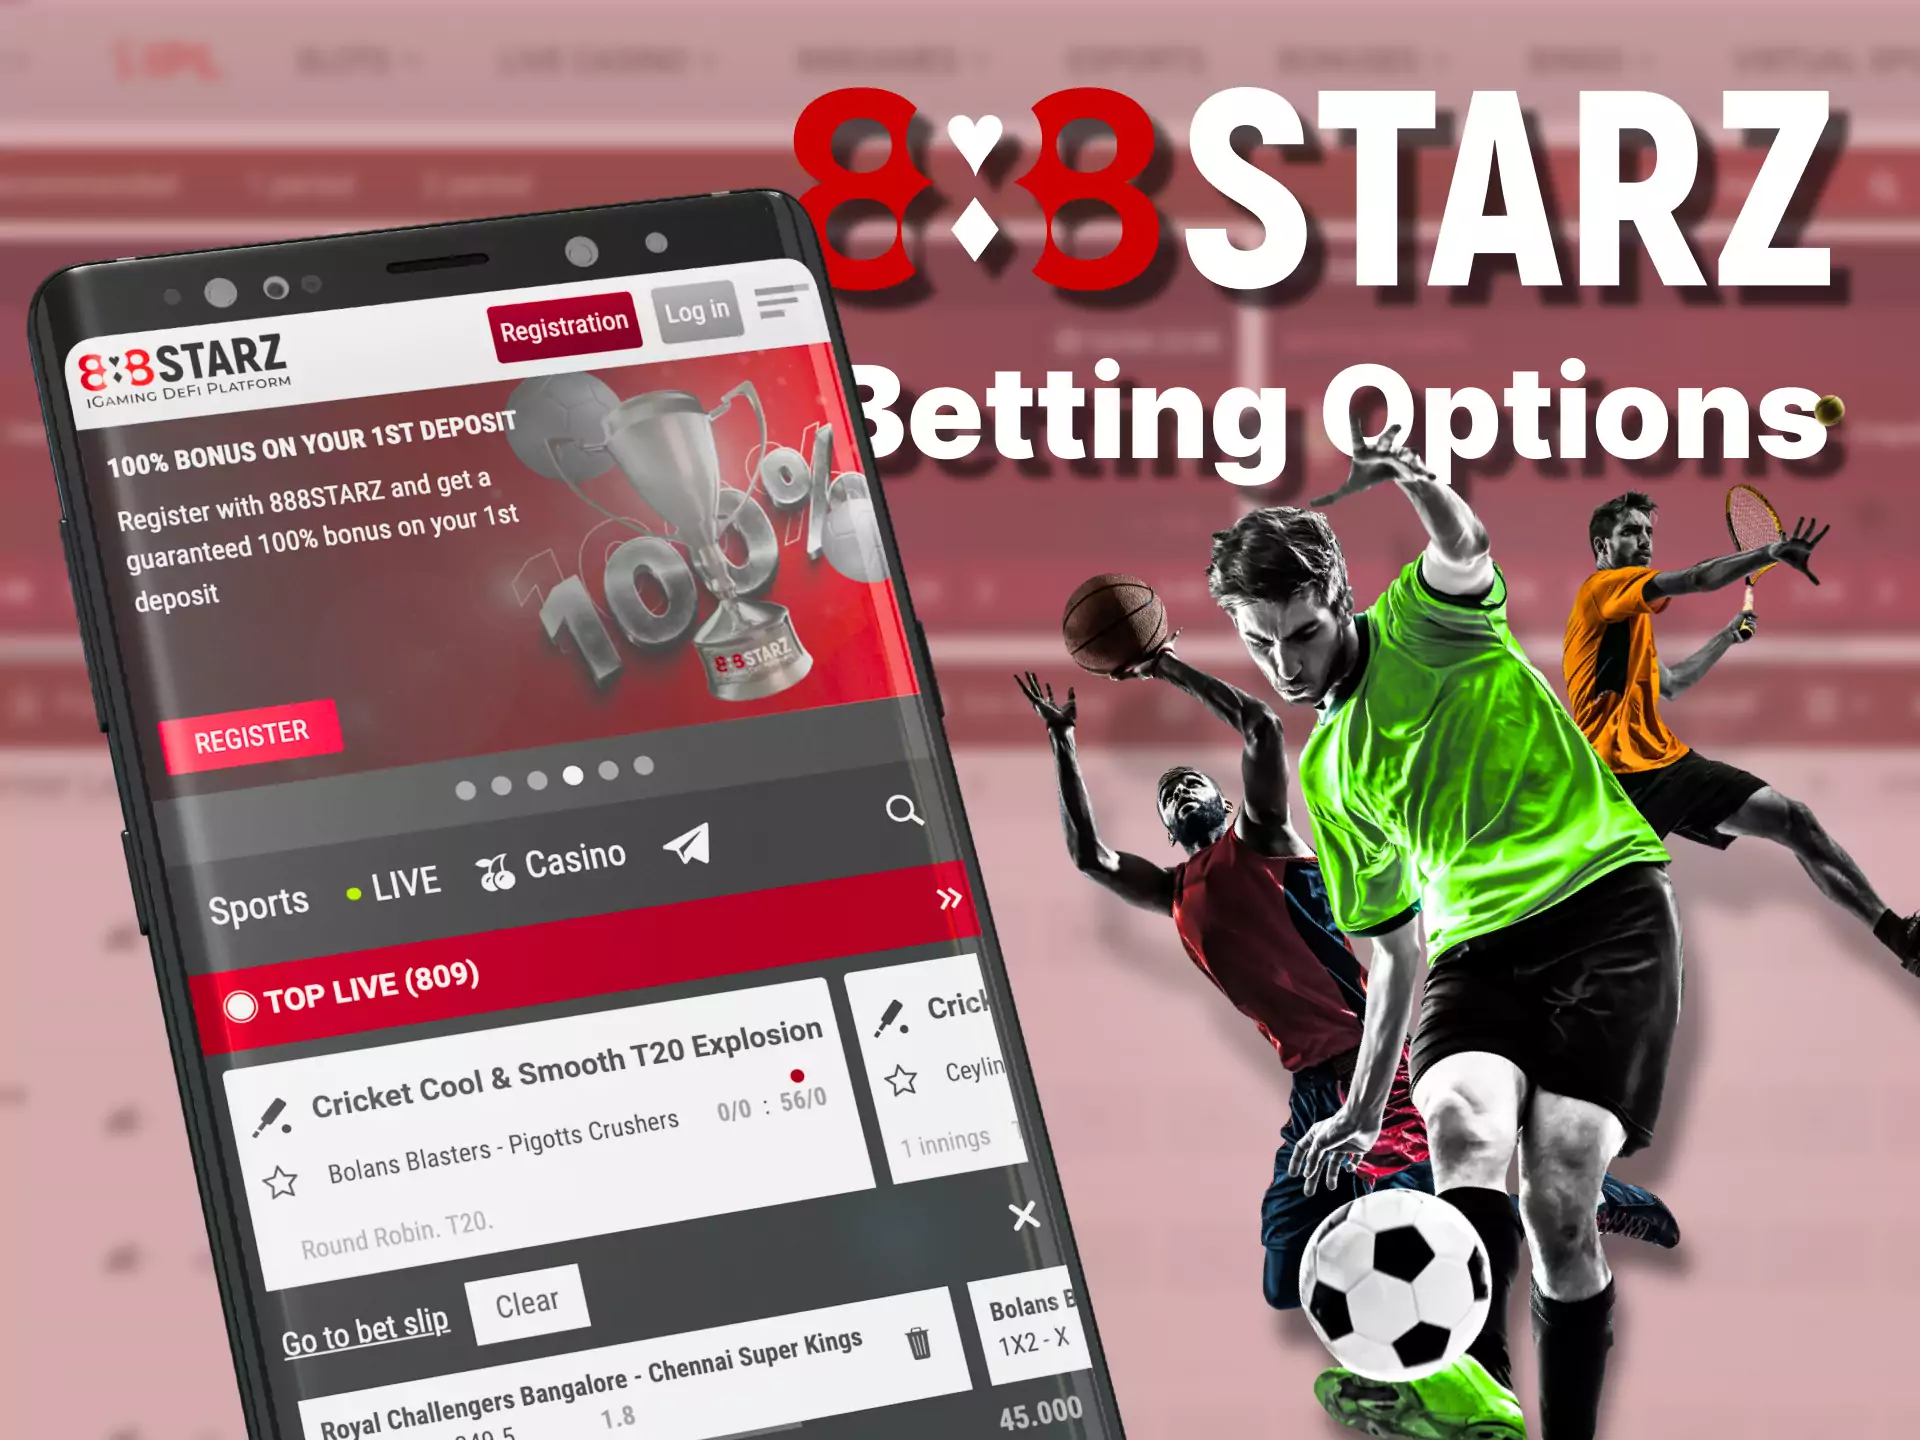 Try the different options for sports betting in the 888starz app.